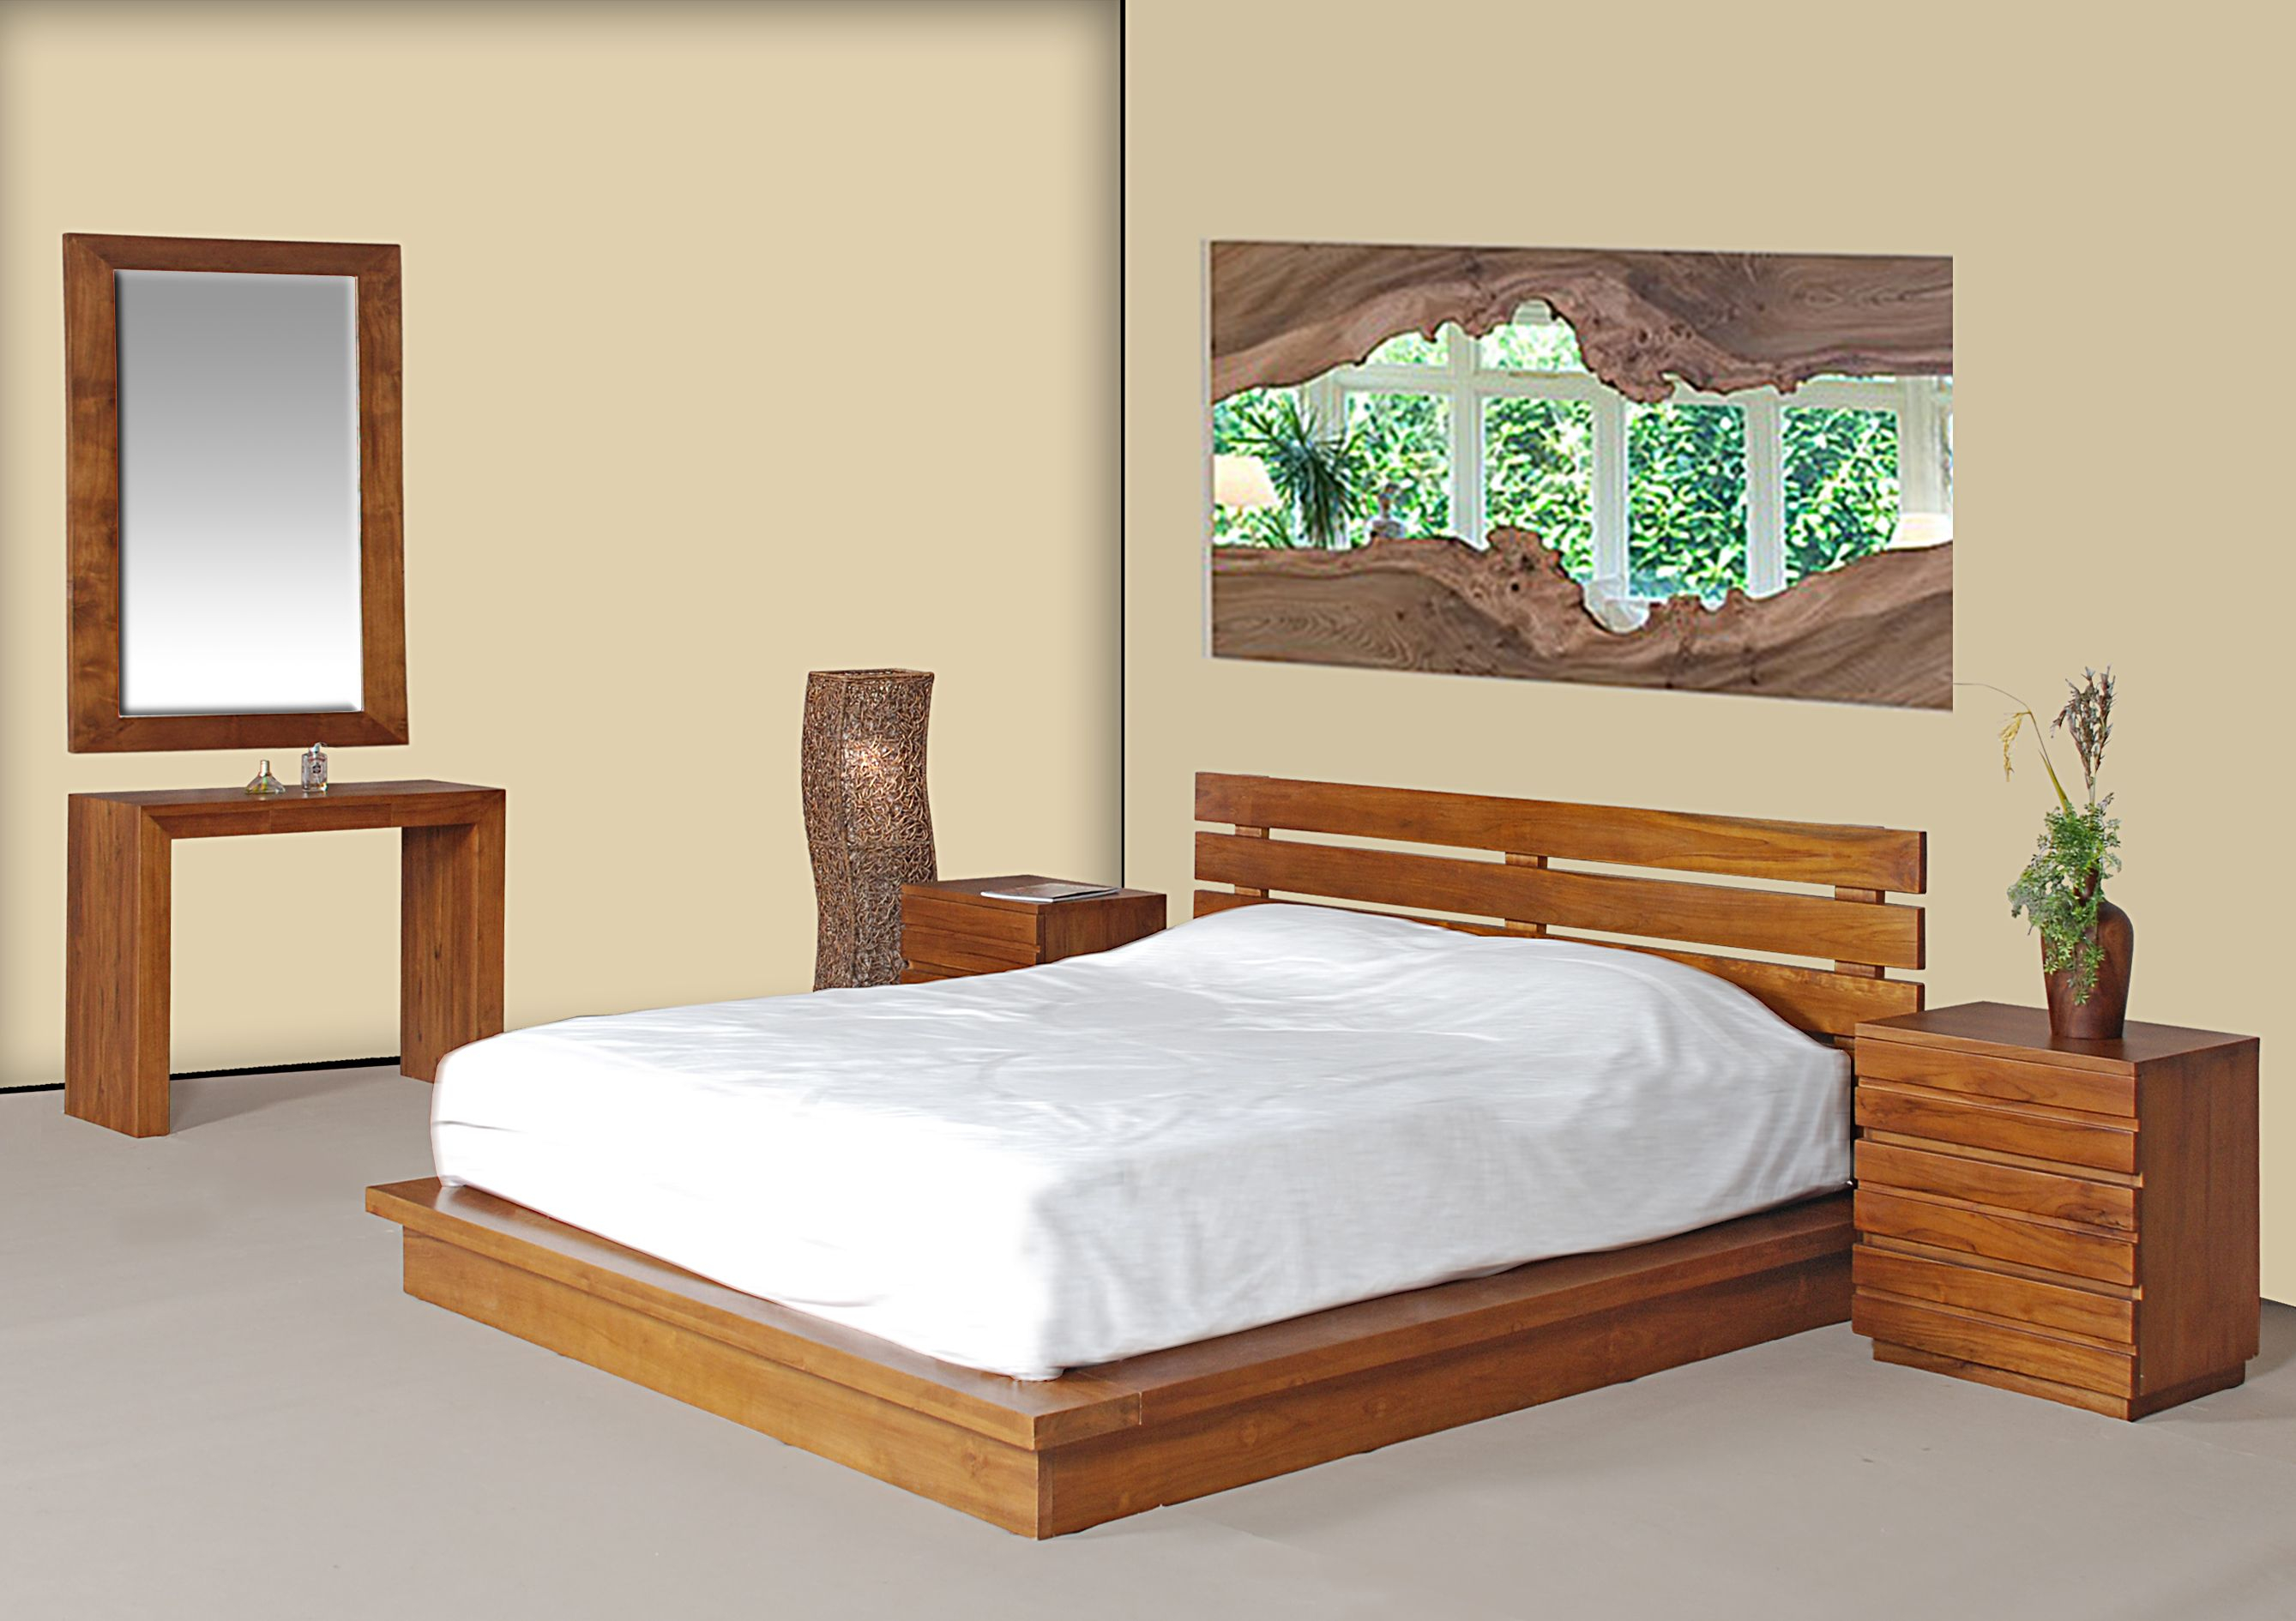 Why Choose A Teak Furniture Factory For Your Home Design Needs